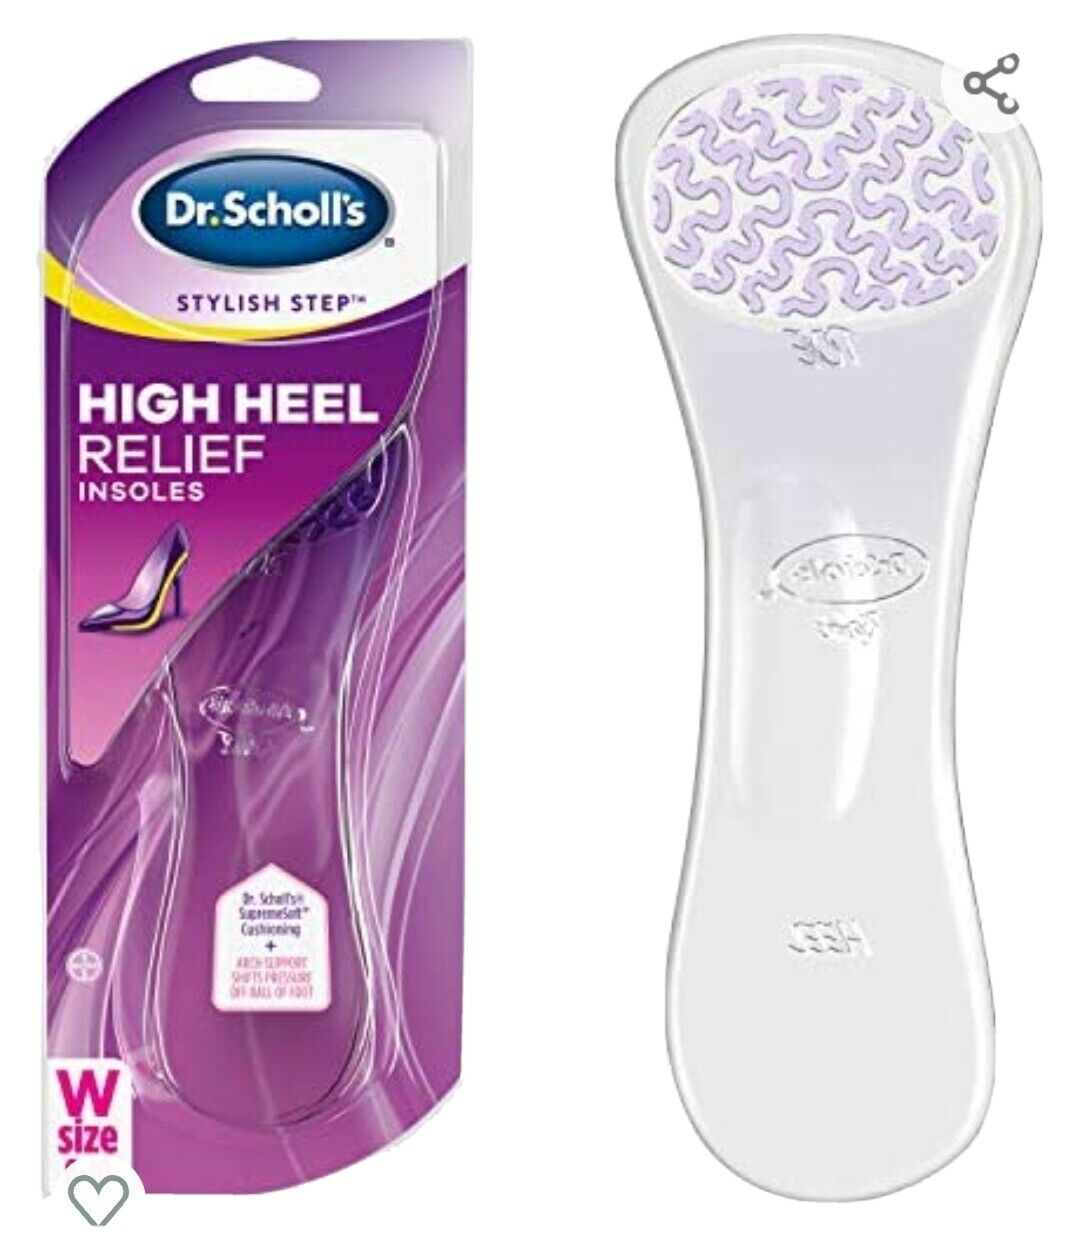 Dr. Scholl's High Heel Relief Insoles for Women, Shoe inserts (Womens 6-10) Sale